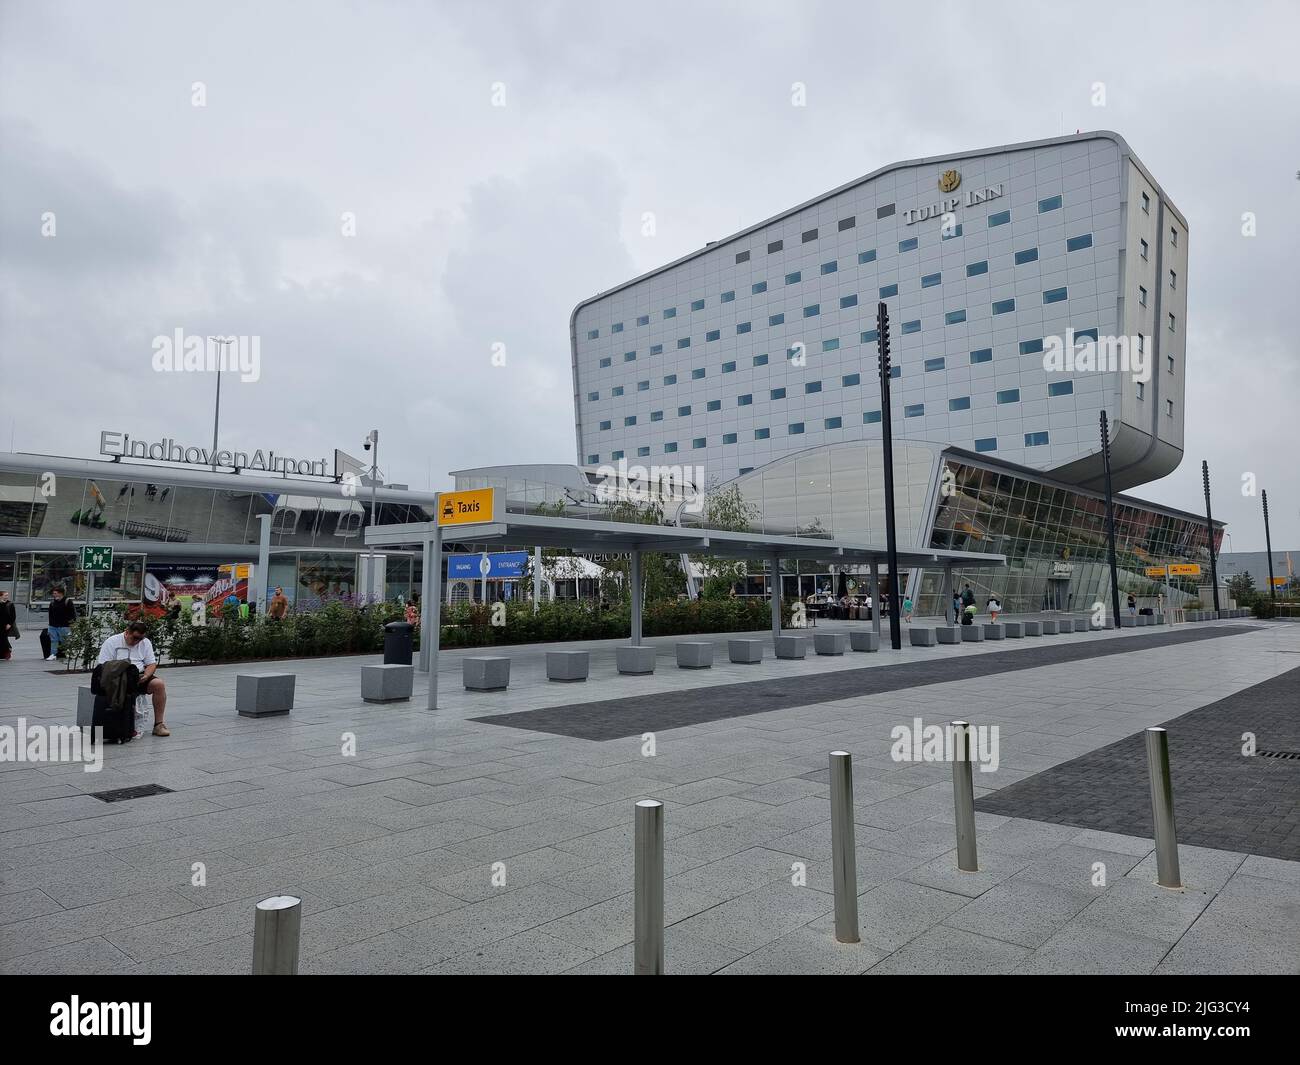 View on Eindhoven Airport, with Tulip Inn hotel above terminal; man is sitting near the taxi stand Stock Photo